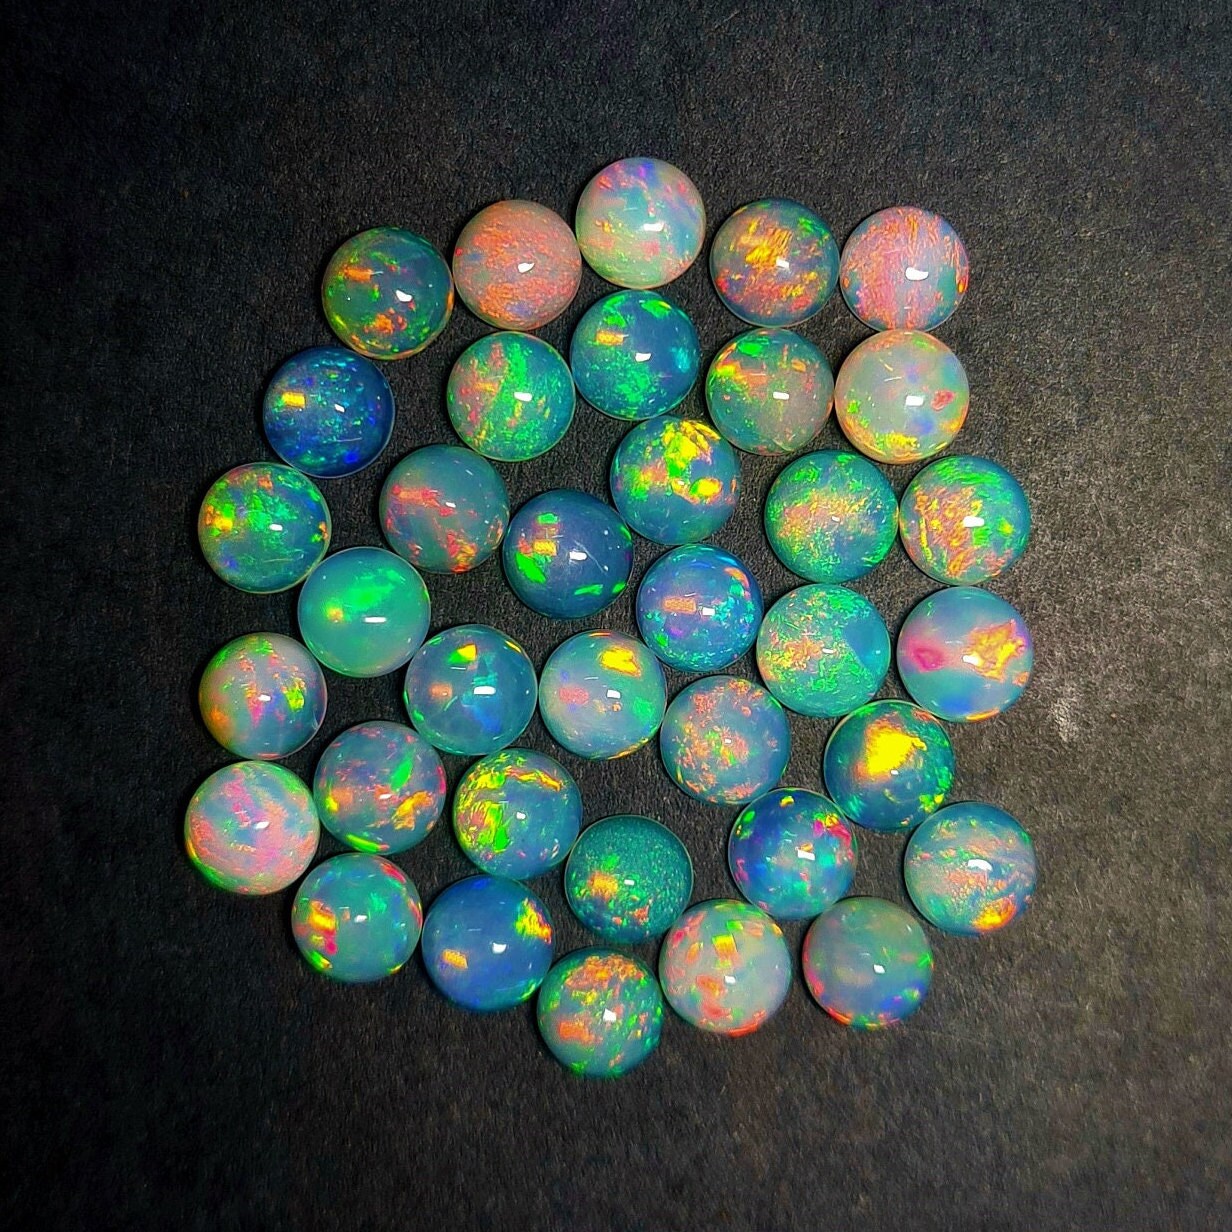 Natural AAA Quality Ethiopian Opal 9 mm Round Cabochon Gemstone, Natural Opal Gemstone For Making Jewelry (Natural)